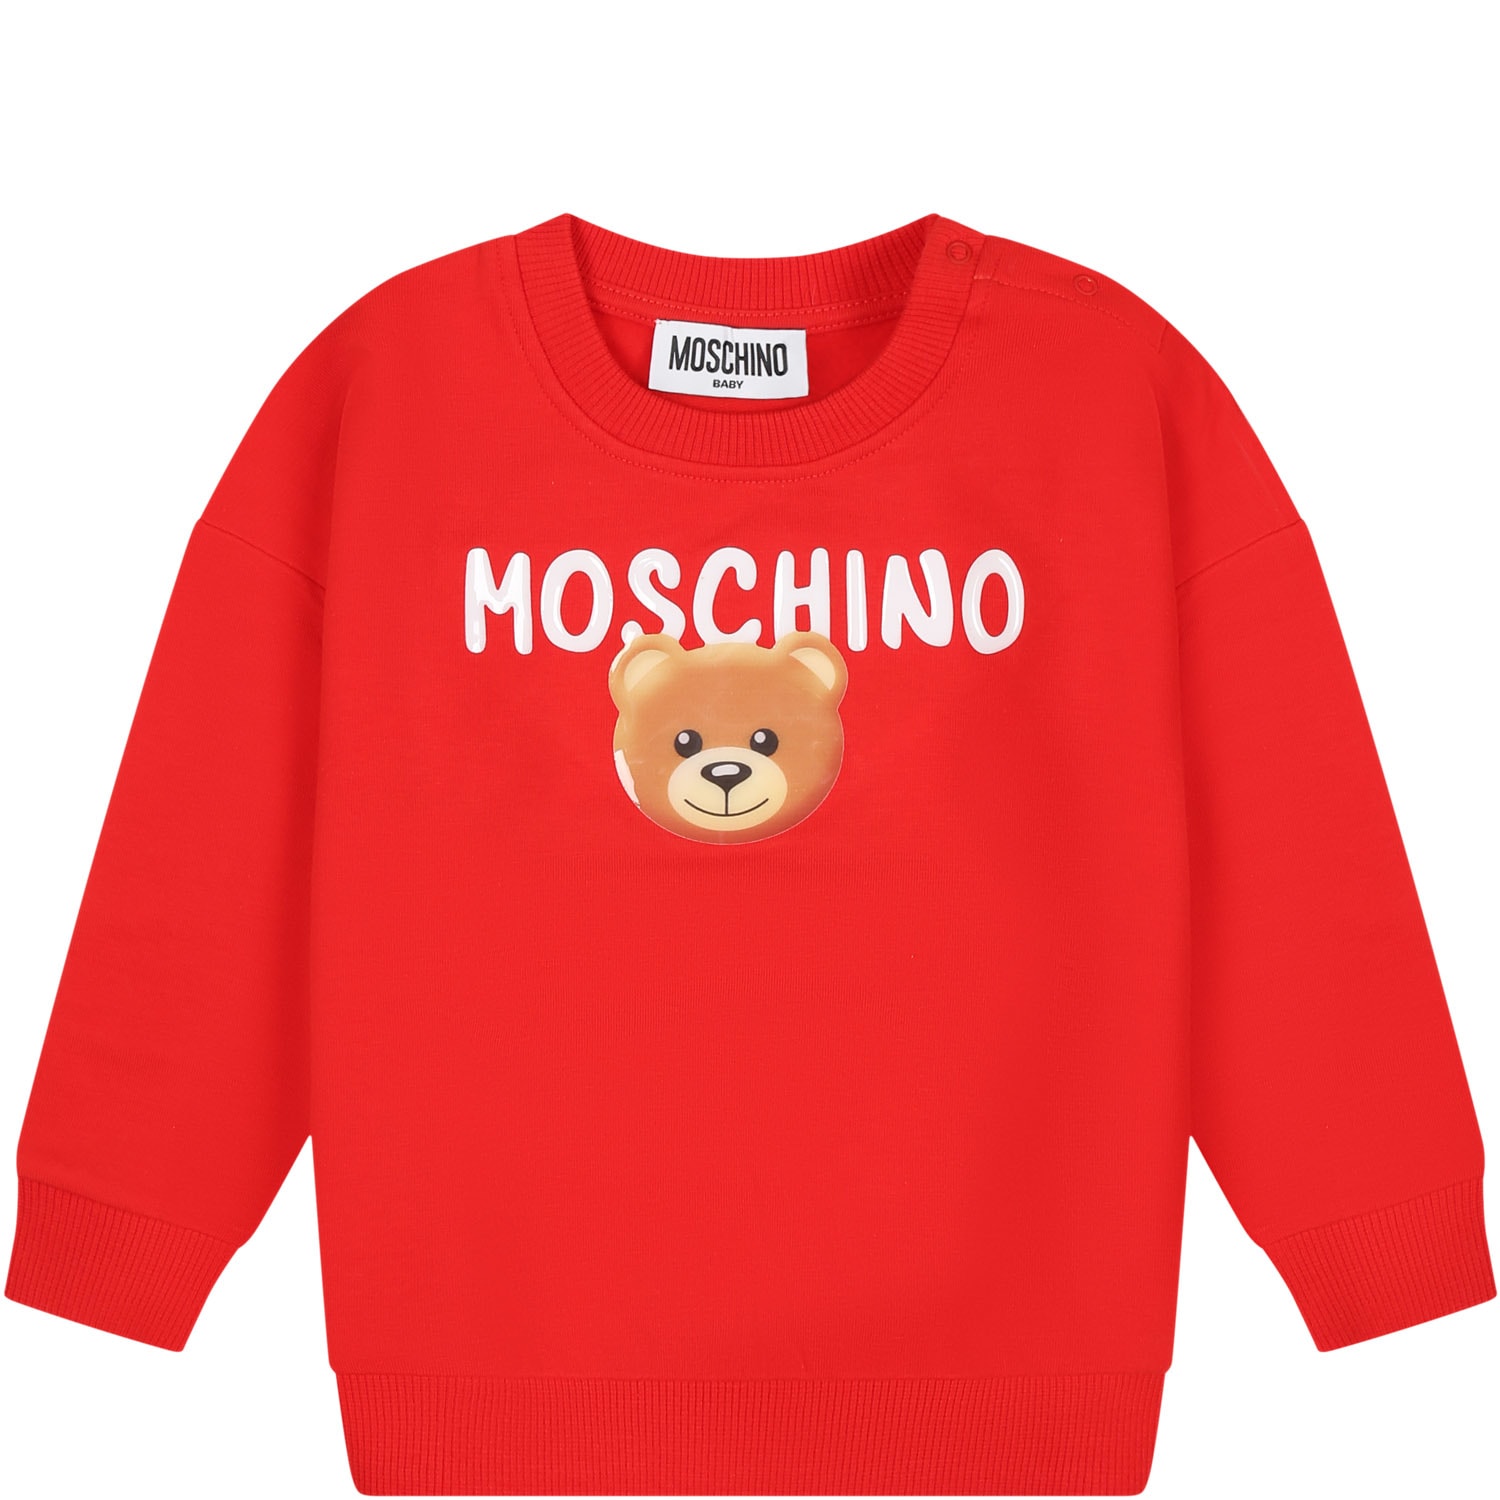 MOSCHINO RED SWEATSHIRT FOR BABY GIRL WITH TEDDY BEAR AND LOGO